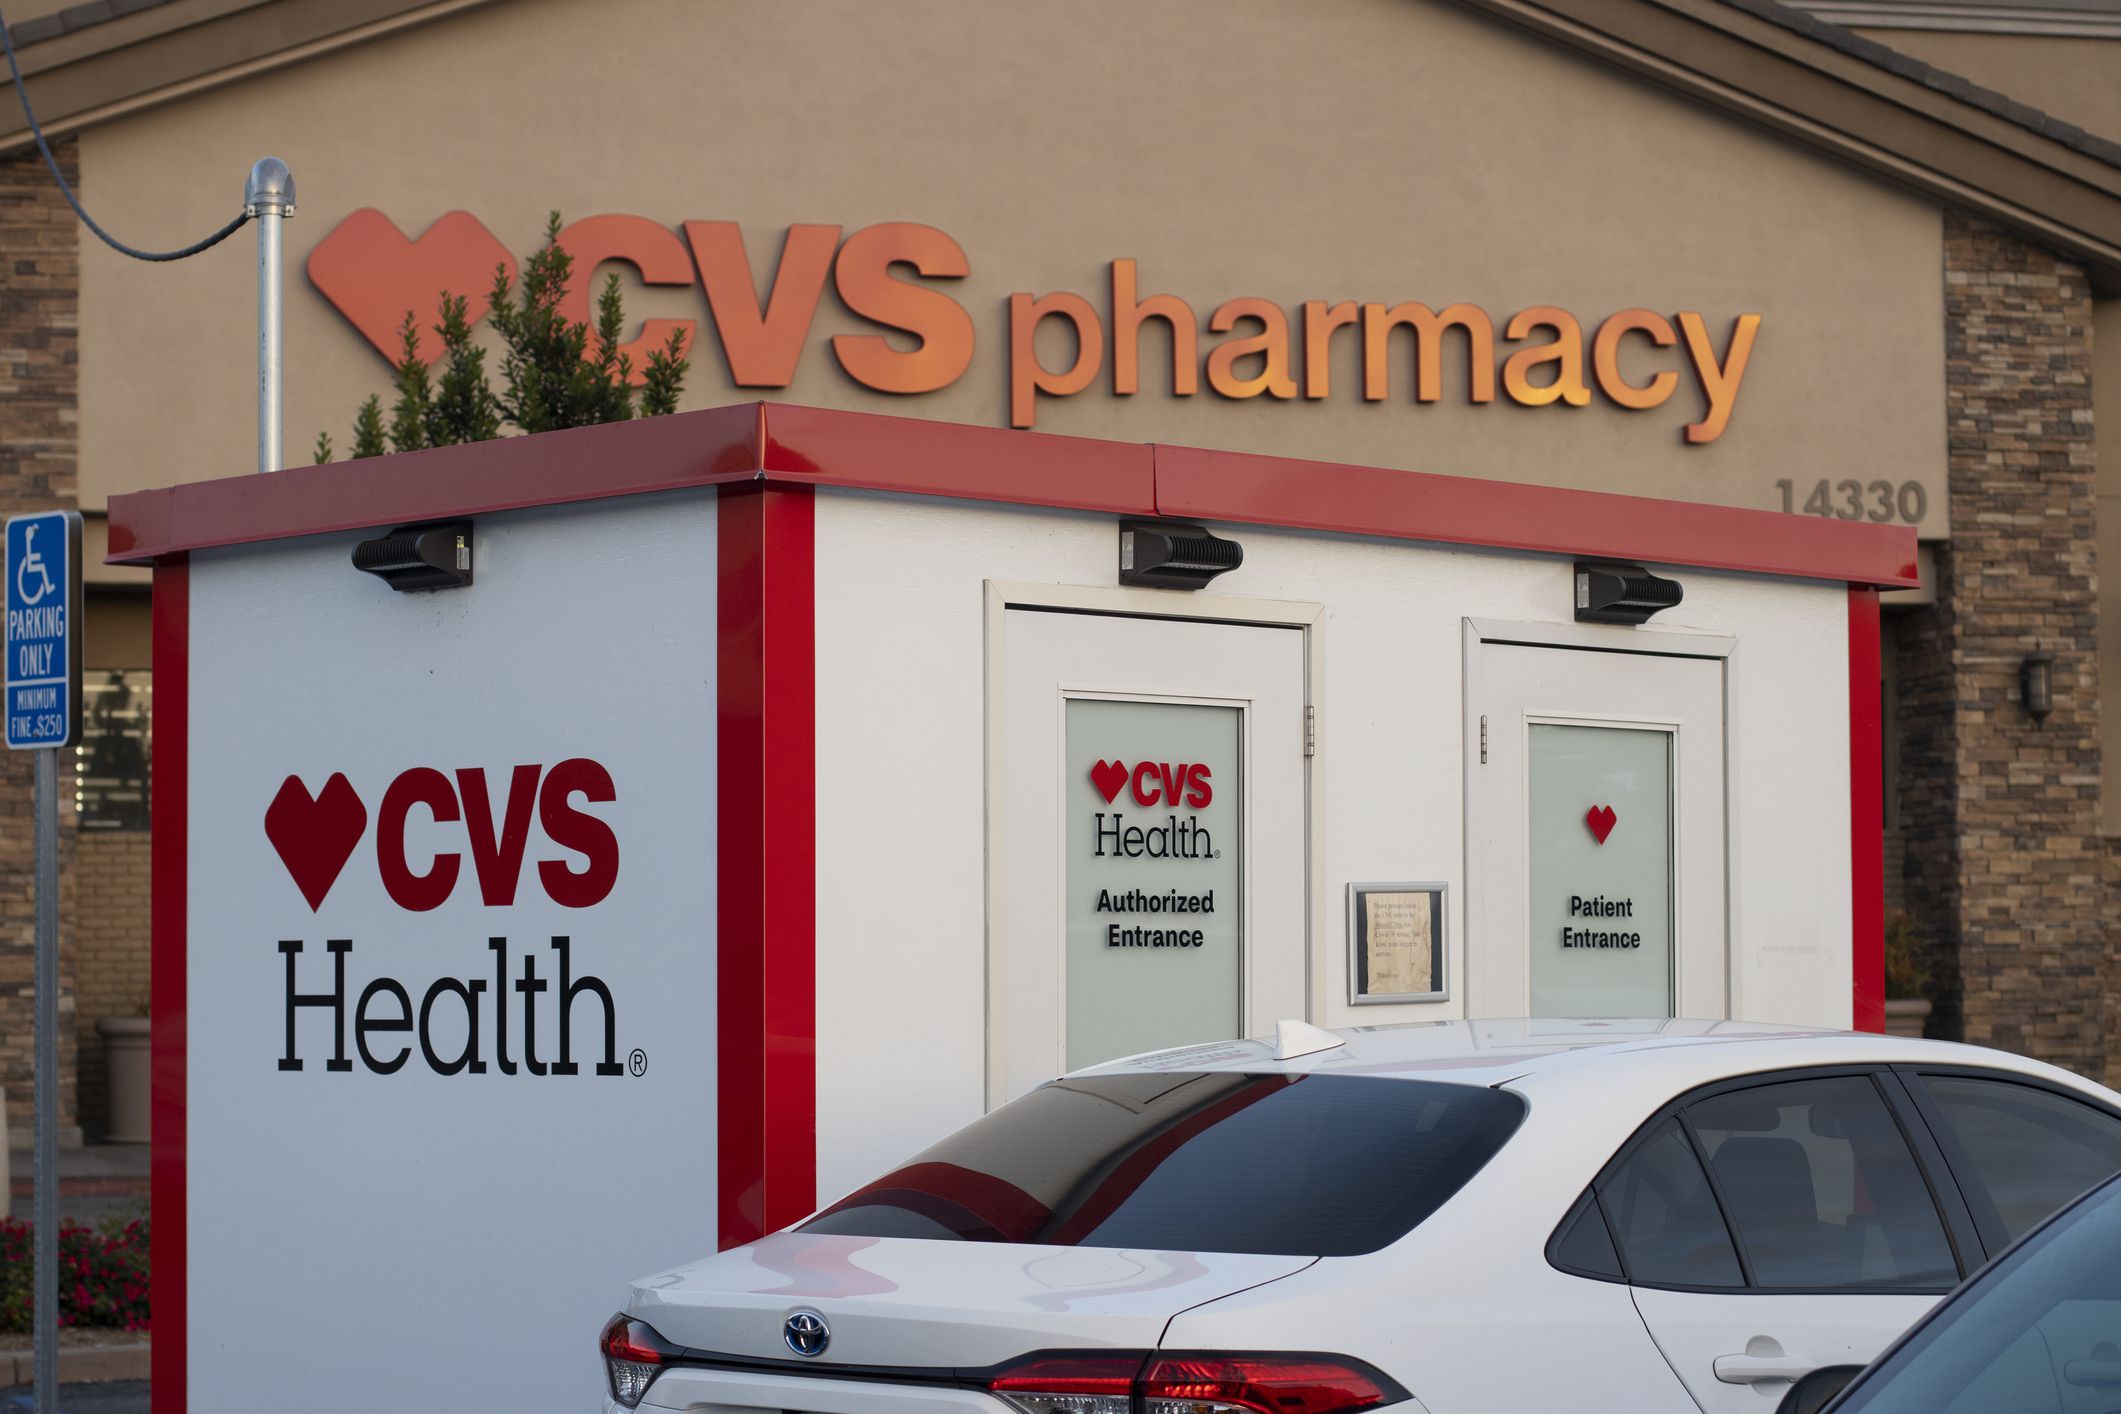 <p><b>Costs:</b> Low to medium</p>Similar to urgent care centers, walk-in clinics offer affordable healthcare and don’t require an appointment. Many pharmacy chains — such as Walgreens and CVS — have opened their own retail clinics, some of which are even cheaper than urgent care. CVS has a helpful <a href="https://www.cvs.com/minuteclinic/services/price-lists">price list</a> so that patients can find out how much treatment costs before they show up. Nurse practitioners, doctors, and other licensed health professionals at <a href="https://www.cvs.com/minuteclinic">CVS’ MinuteClinic</a> can vaccinate against meningitis ($205), treat bug bites and stings (between $99 and $139), and screen for HIV ($99-$139), among a whole host of other everyday treatments.  <p><b>For more affordable healthcare coverage,</b> <a href="https://cheapism.us14.list-manage.com/subscribe?u=de966e79b38e1d833d5781074&id=c14db36dd0">please sign up for our free newsletters</a>.</p>